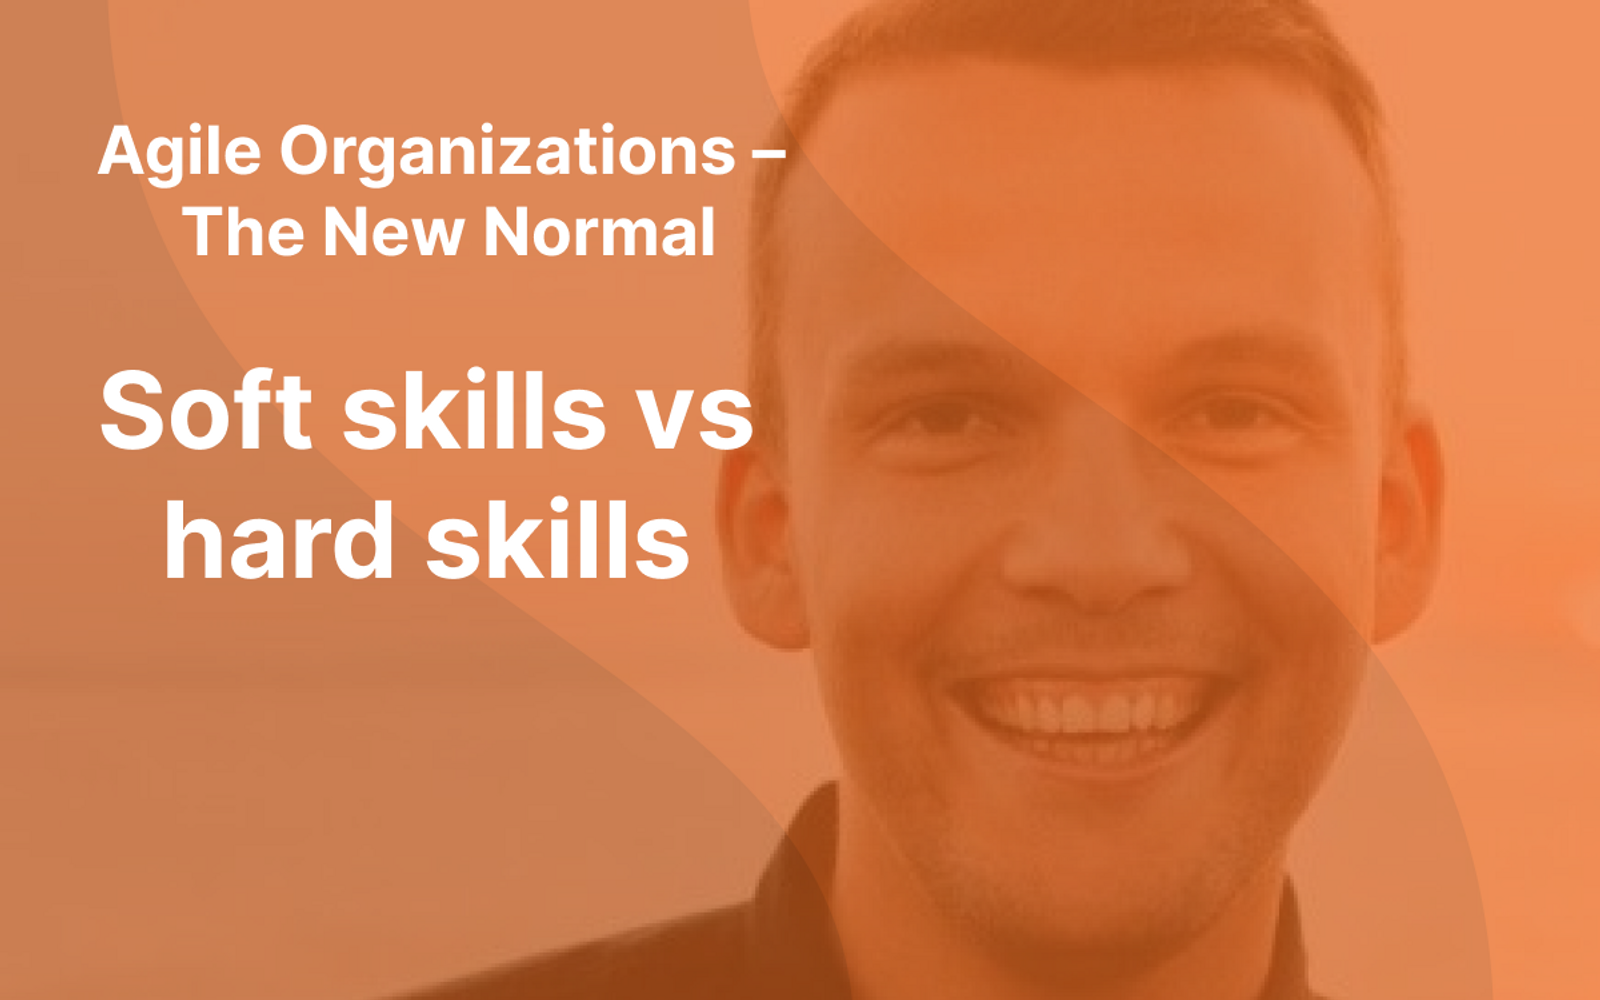 Picture of Sindre Suphellen with orange overlay and the text "Agile Organizations - The New Normal" and "Soft skills vs hard skills" written in white